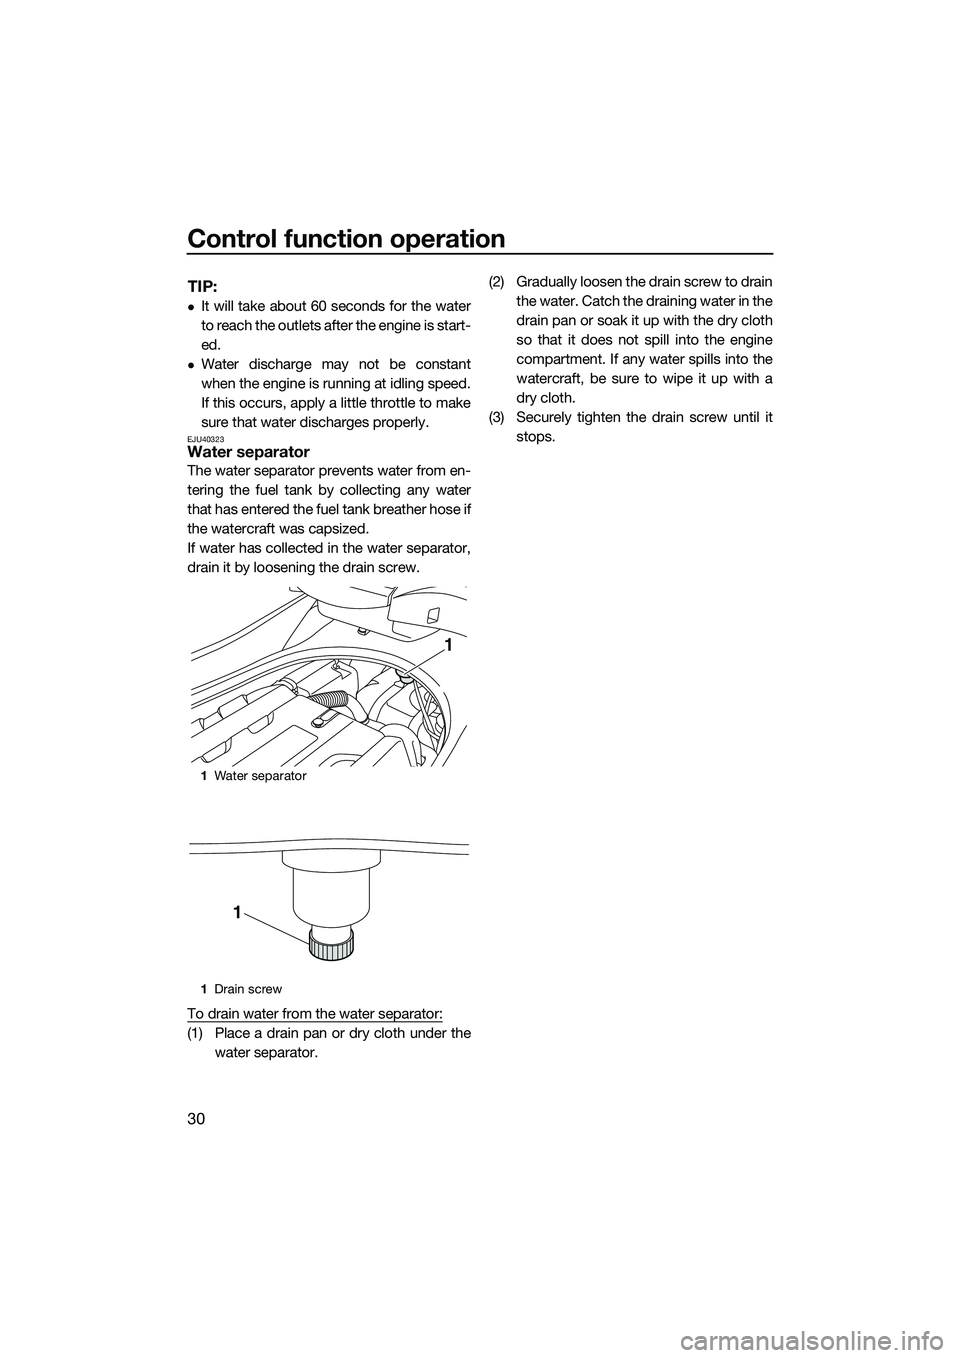 YAMAHA FZR SVHO 2015  Owners Manual Control function operation
30
TIP:
It will take about 60 seconds for the water
to reach the outlets after the engine is start-
ed.
Water discharge may not be constant
when the engine is running 